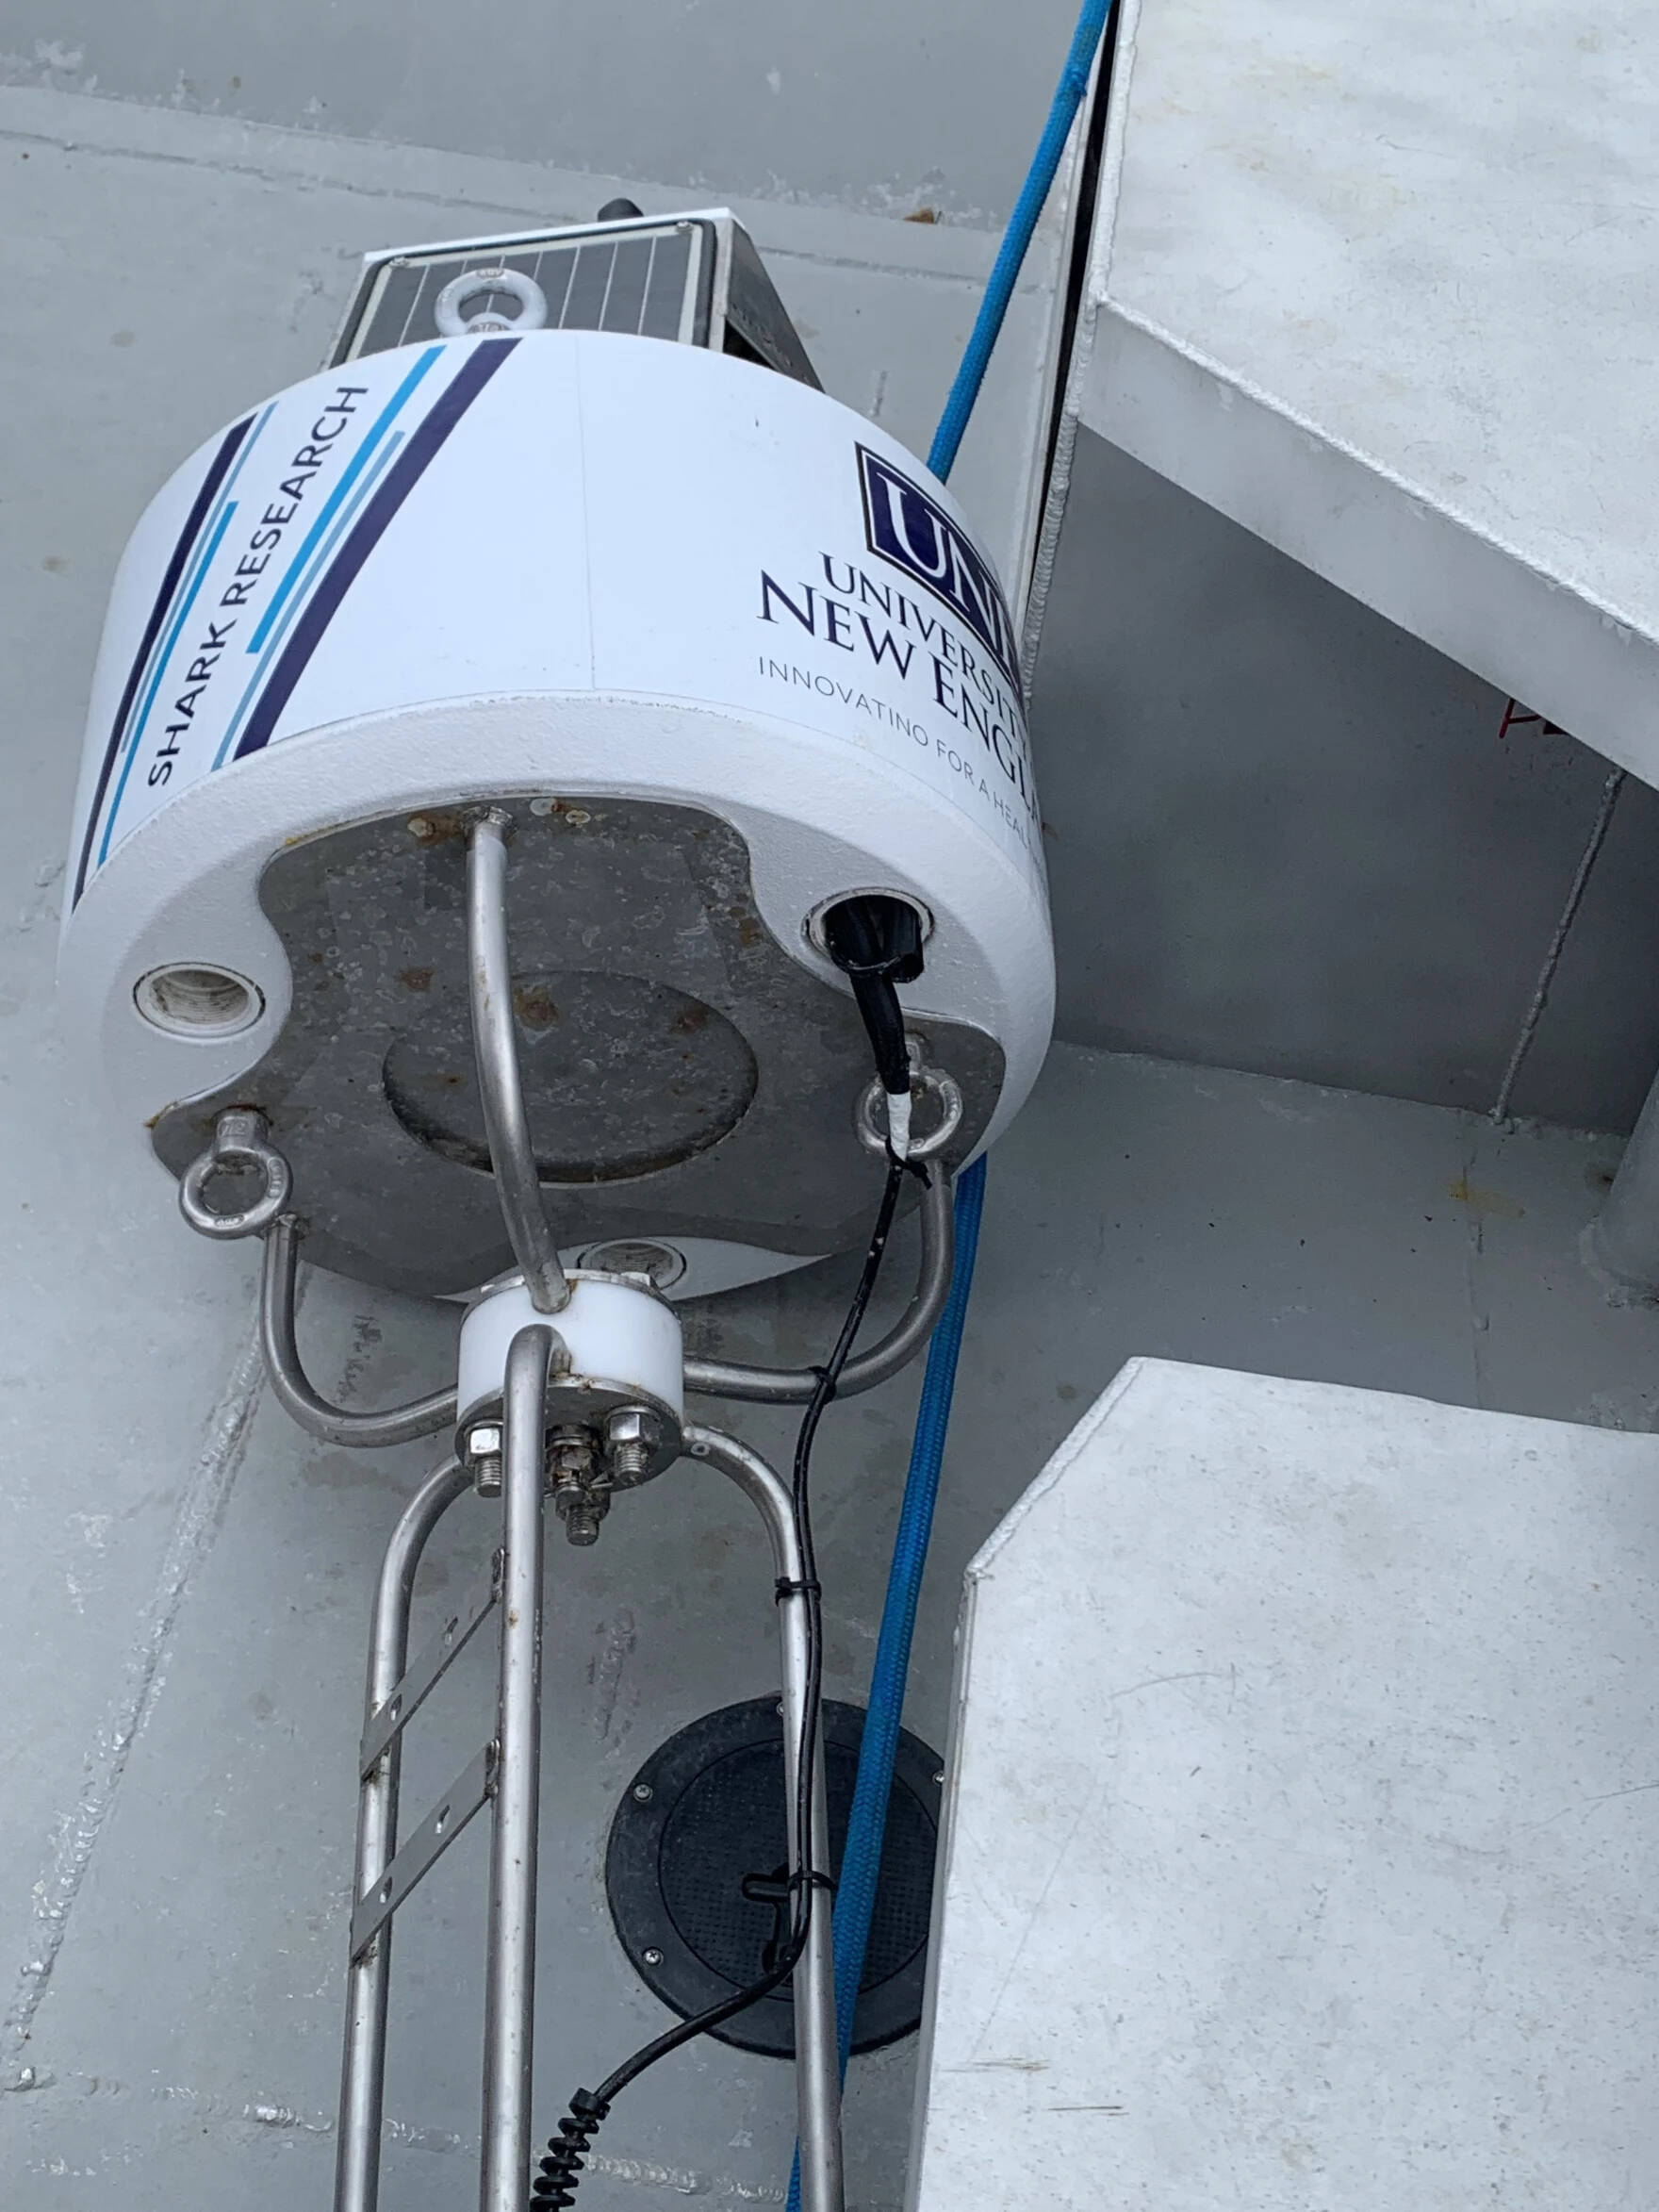 This solar-powered buoy, deployed in Saco Bay on Wednesday, June 7, 2023 by a team from the University of New England, can detect tagged white sharks and send a notice to lifeguards in real time. (Nicole Ogrysko/Maine Public)